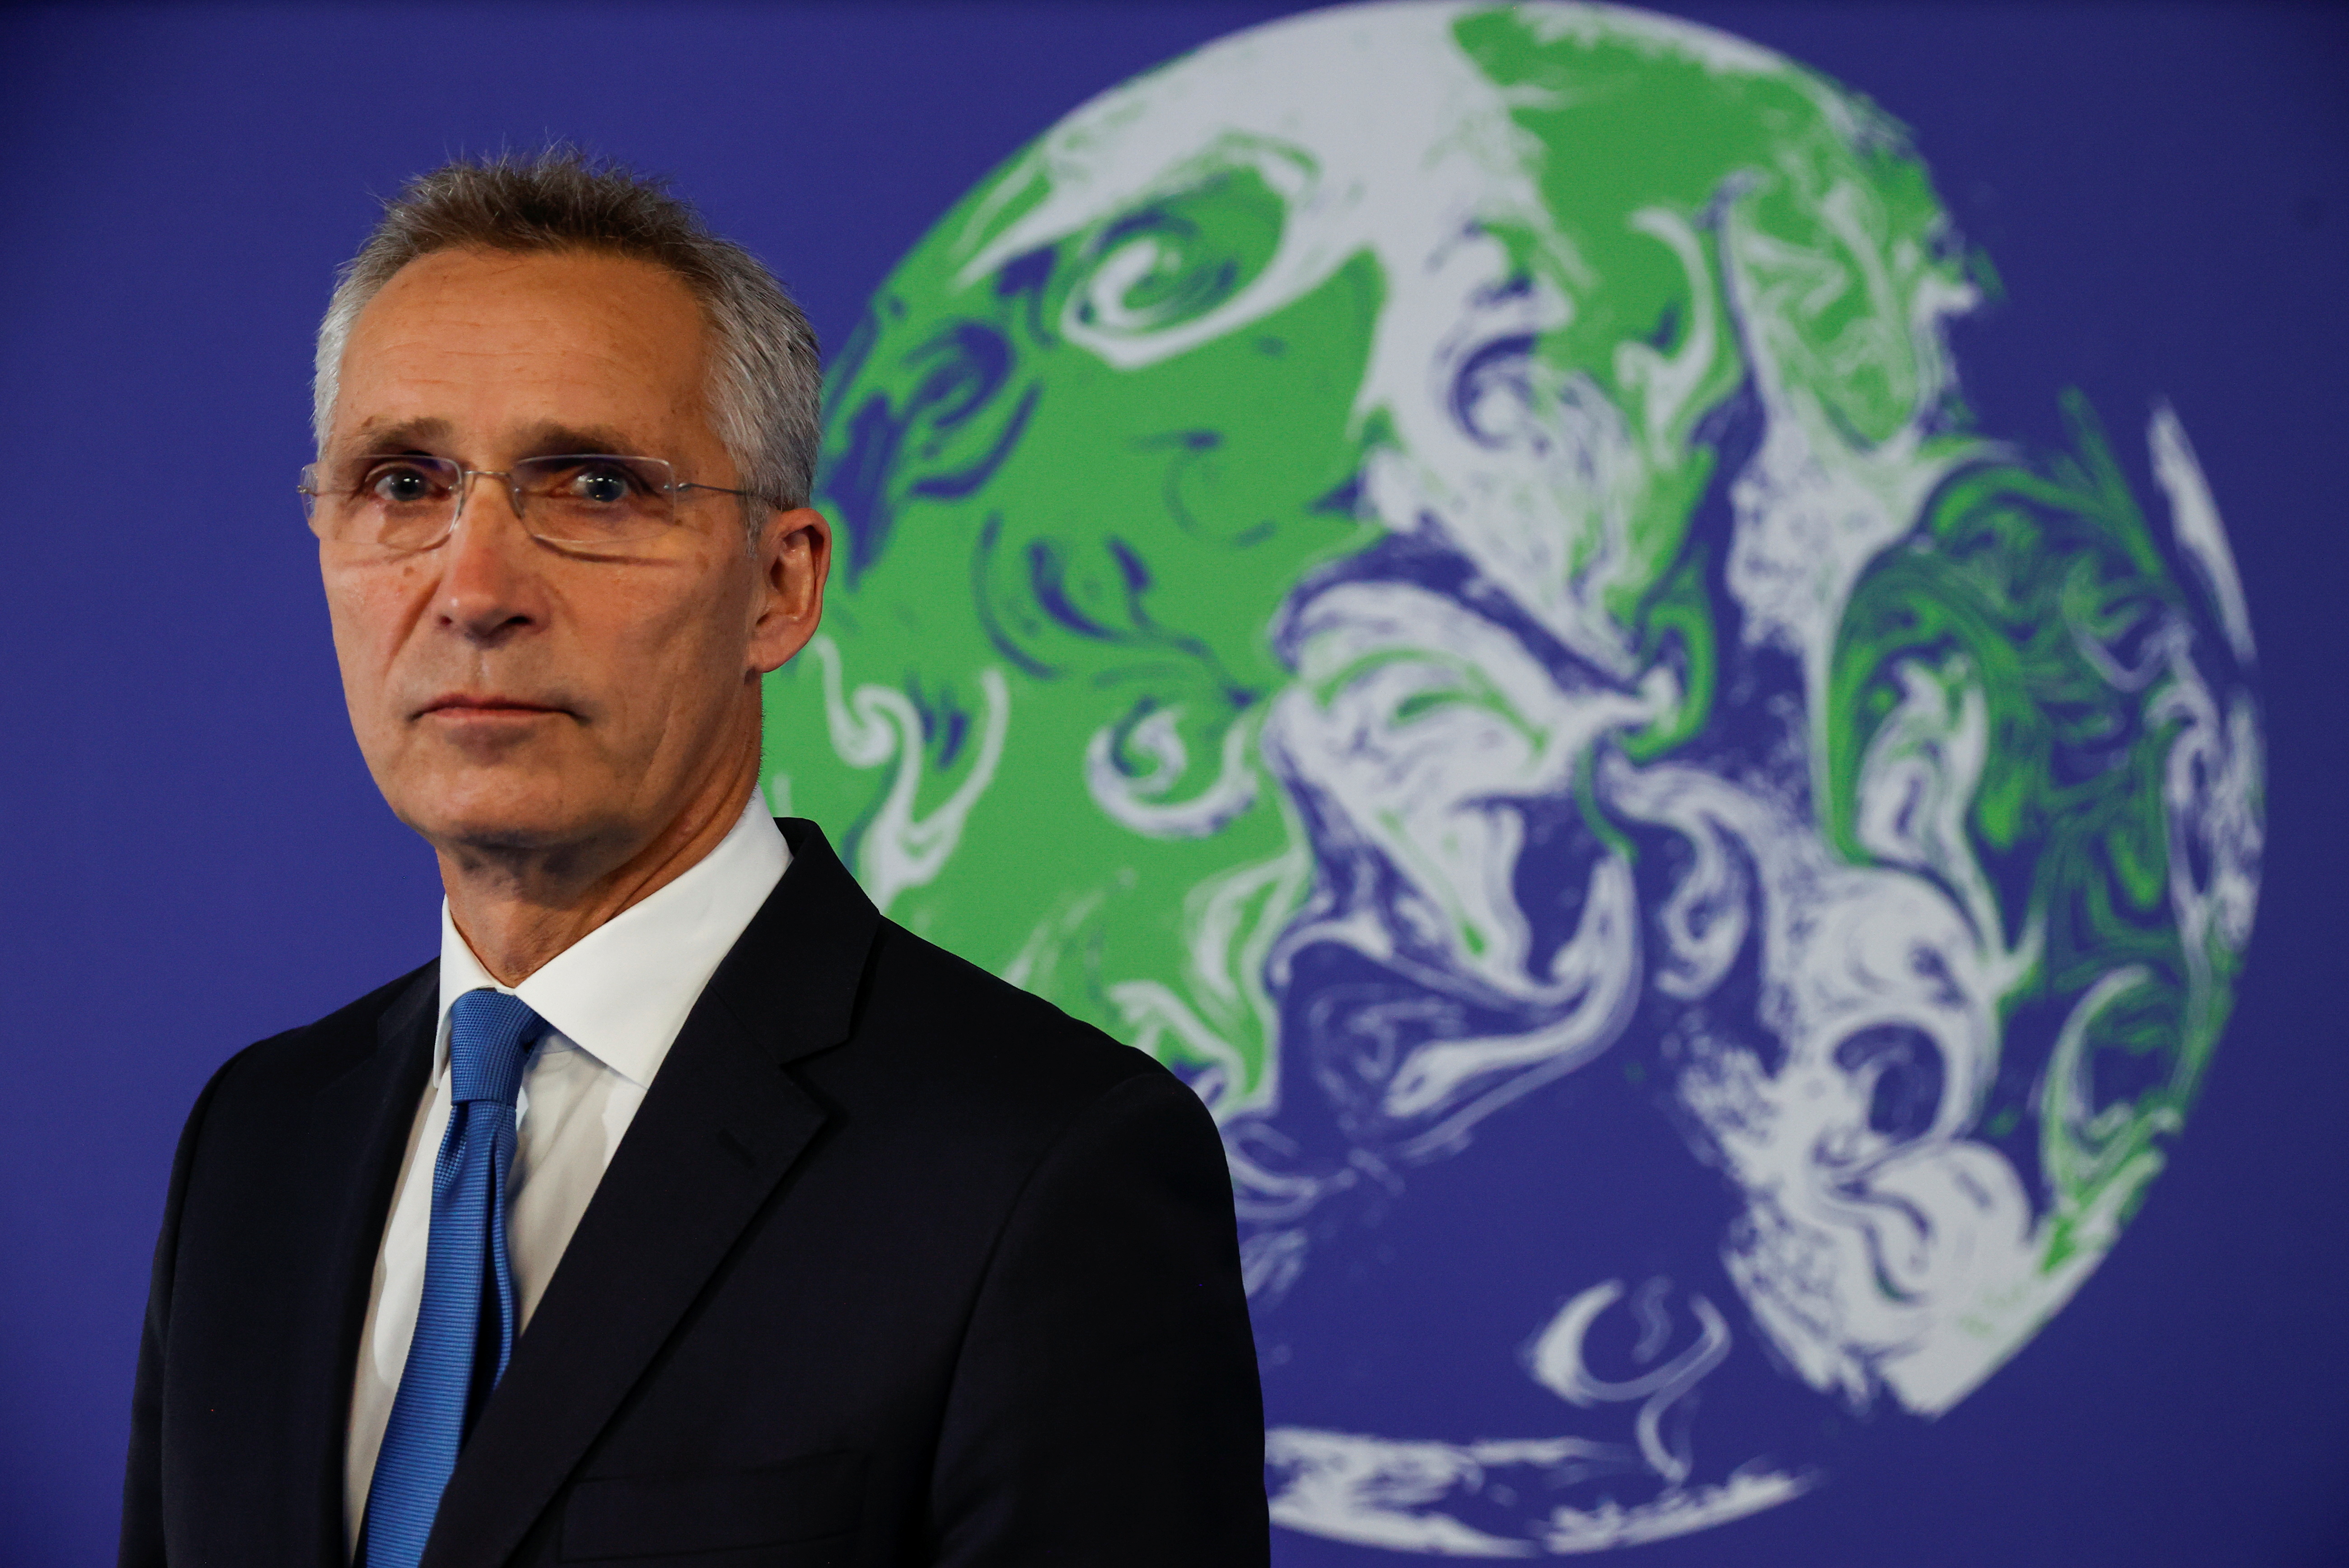 NATO Secretary General Jens Stoltenberg poses for a picture during the UN Climate Change Conference (COP26) in Glasgow, Scotland, Britain, November 2, 2021. REUTERS/Phil Noble